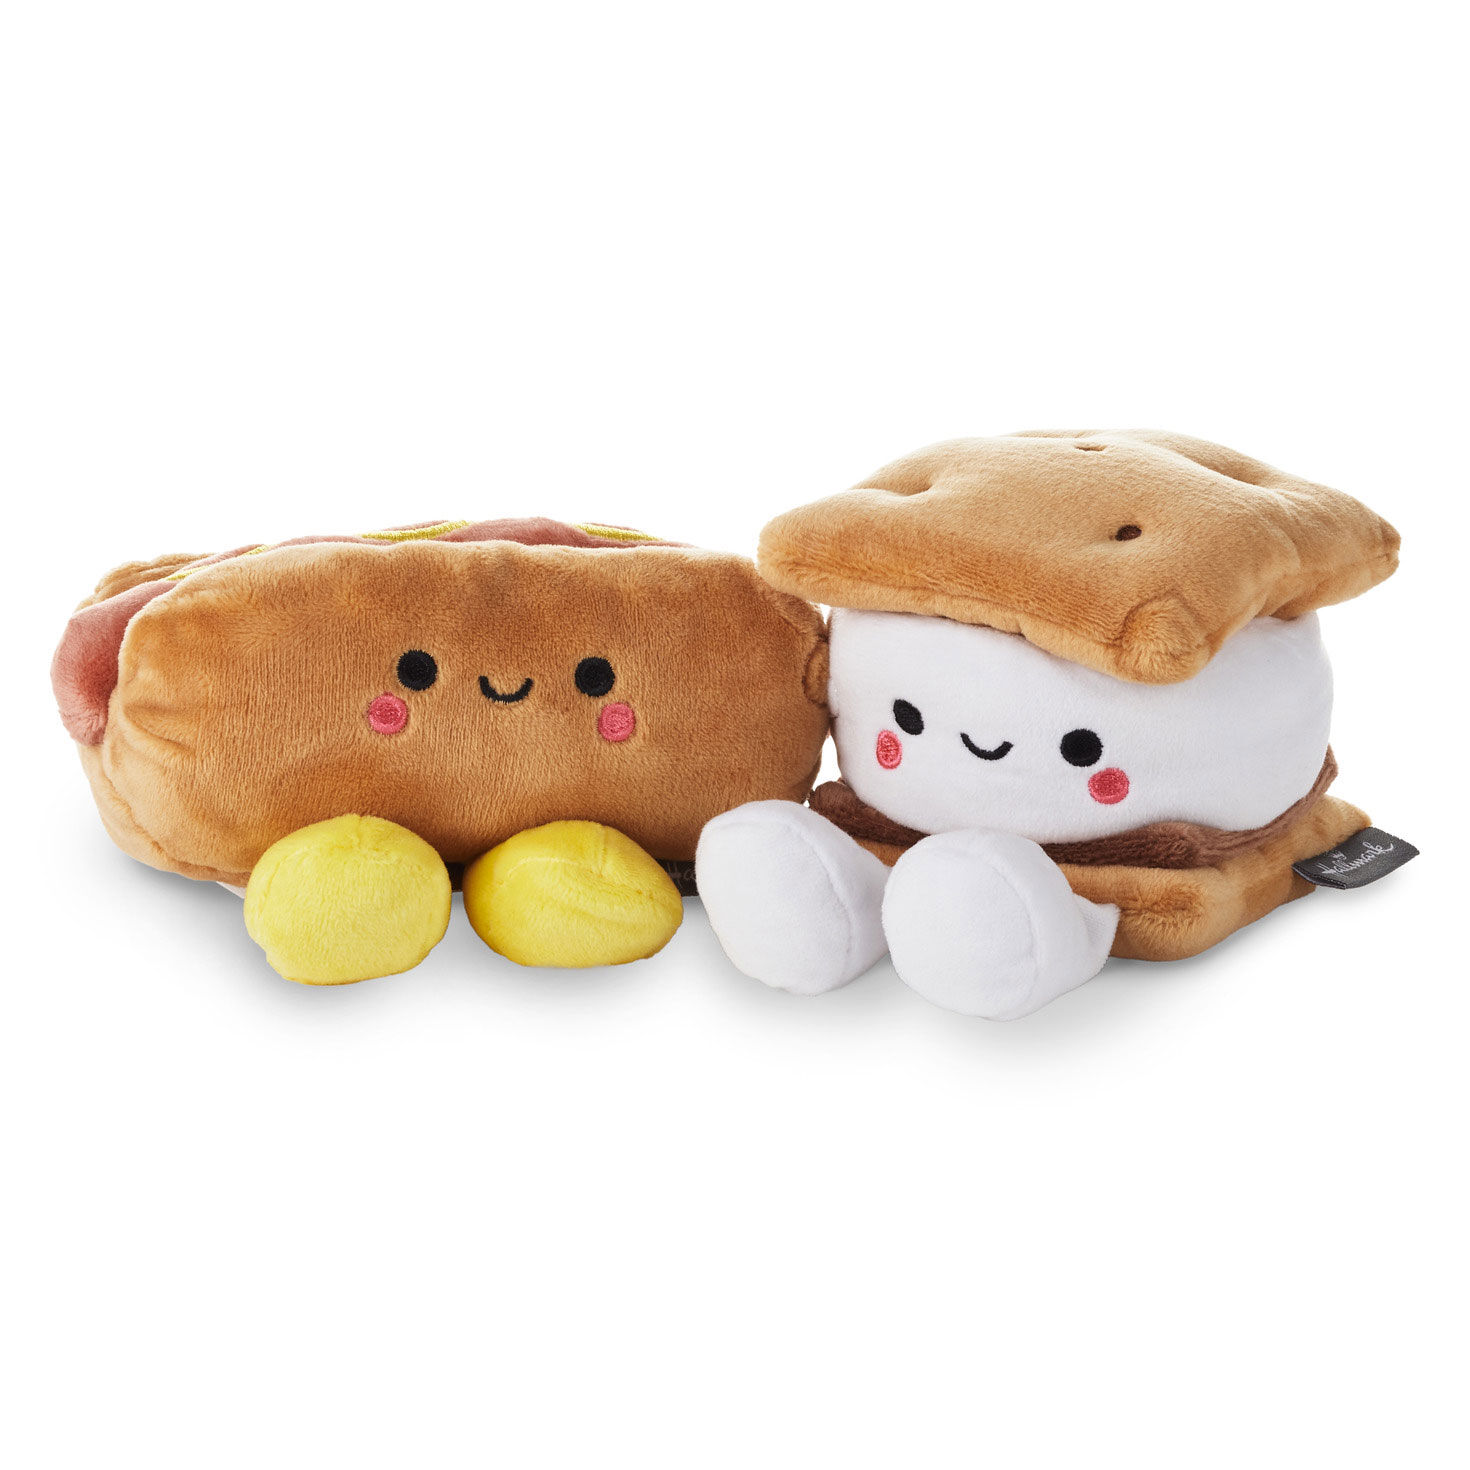 Better Together Hot Dog and S'More Magnetic Plush, 4" for only USD 16.99 | Hallmark